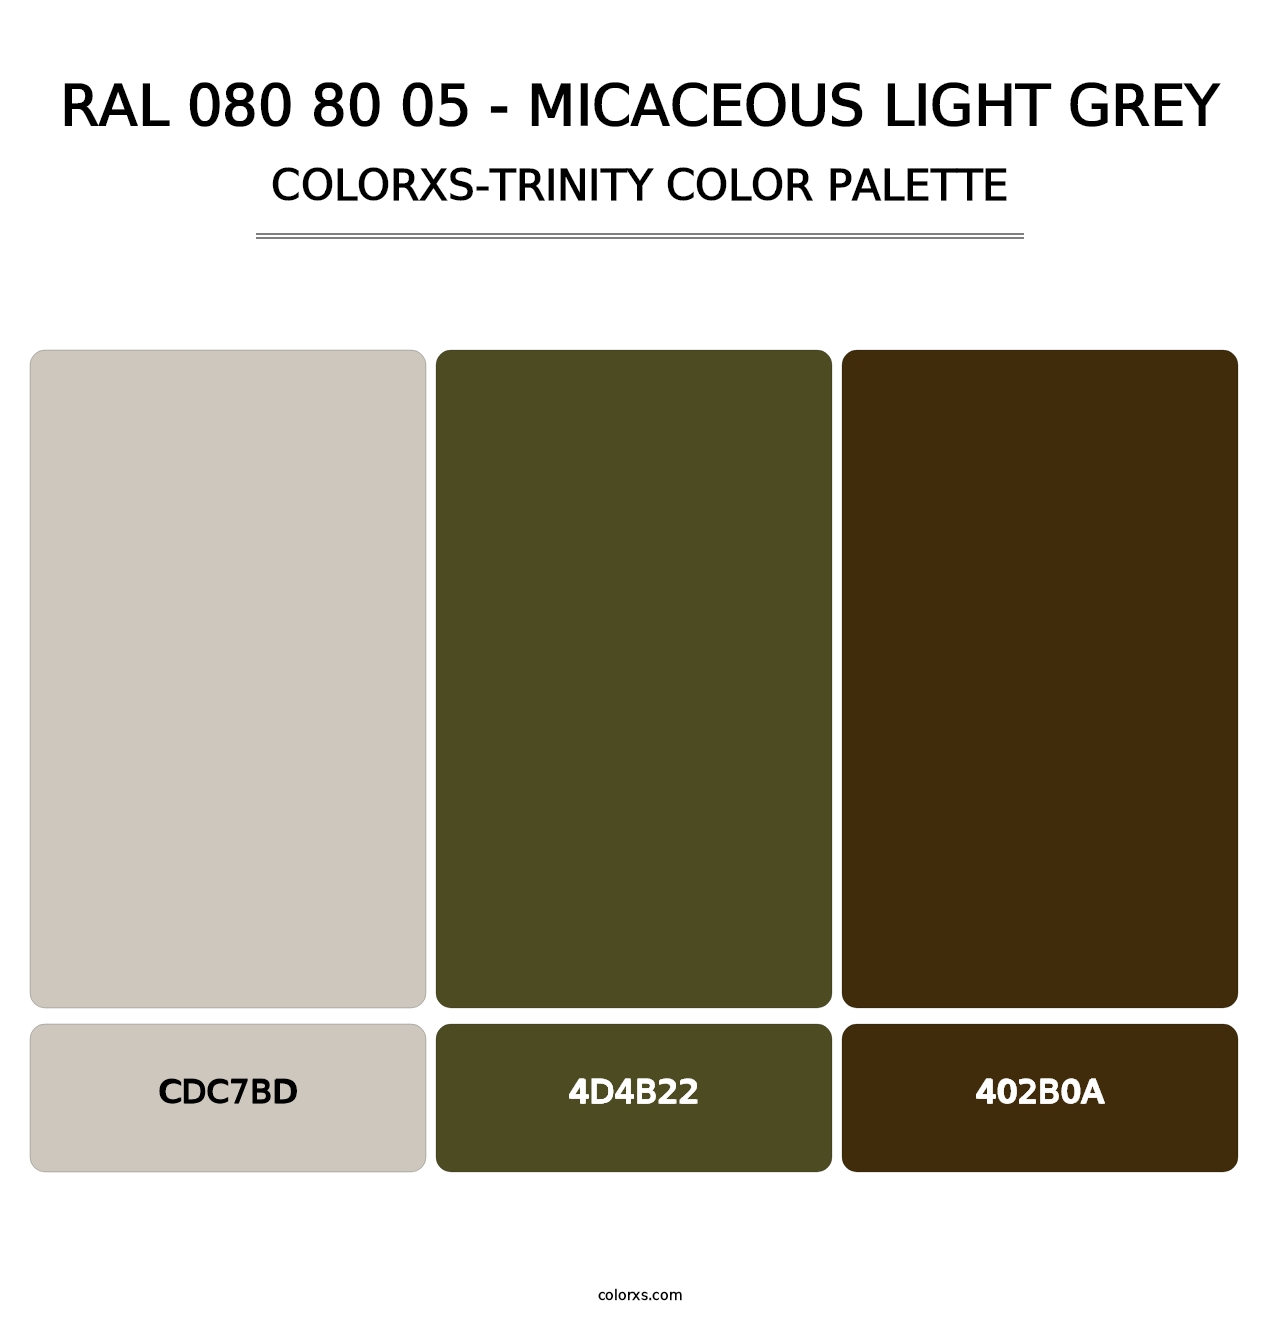 RAL 080 80 05 - Micaceous Light Grey - Colorxs Trinity Palette